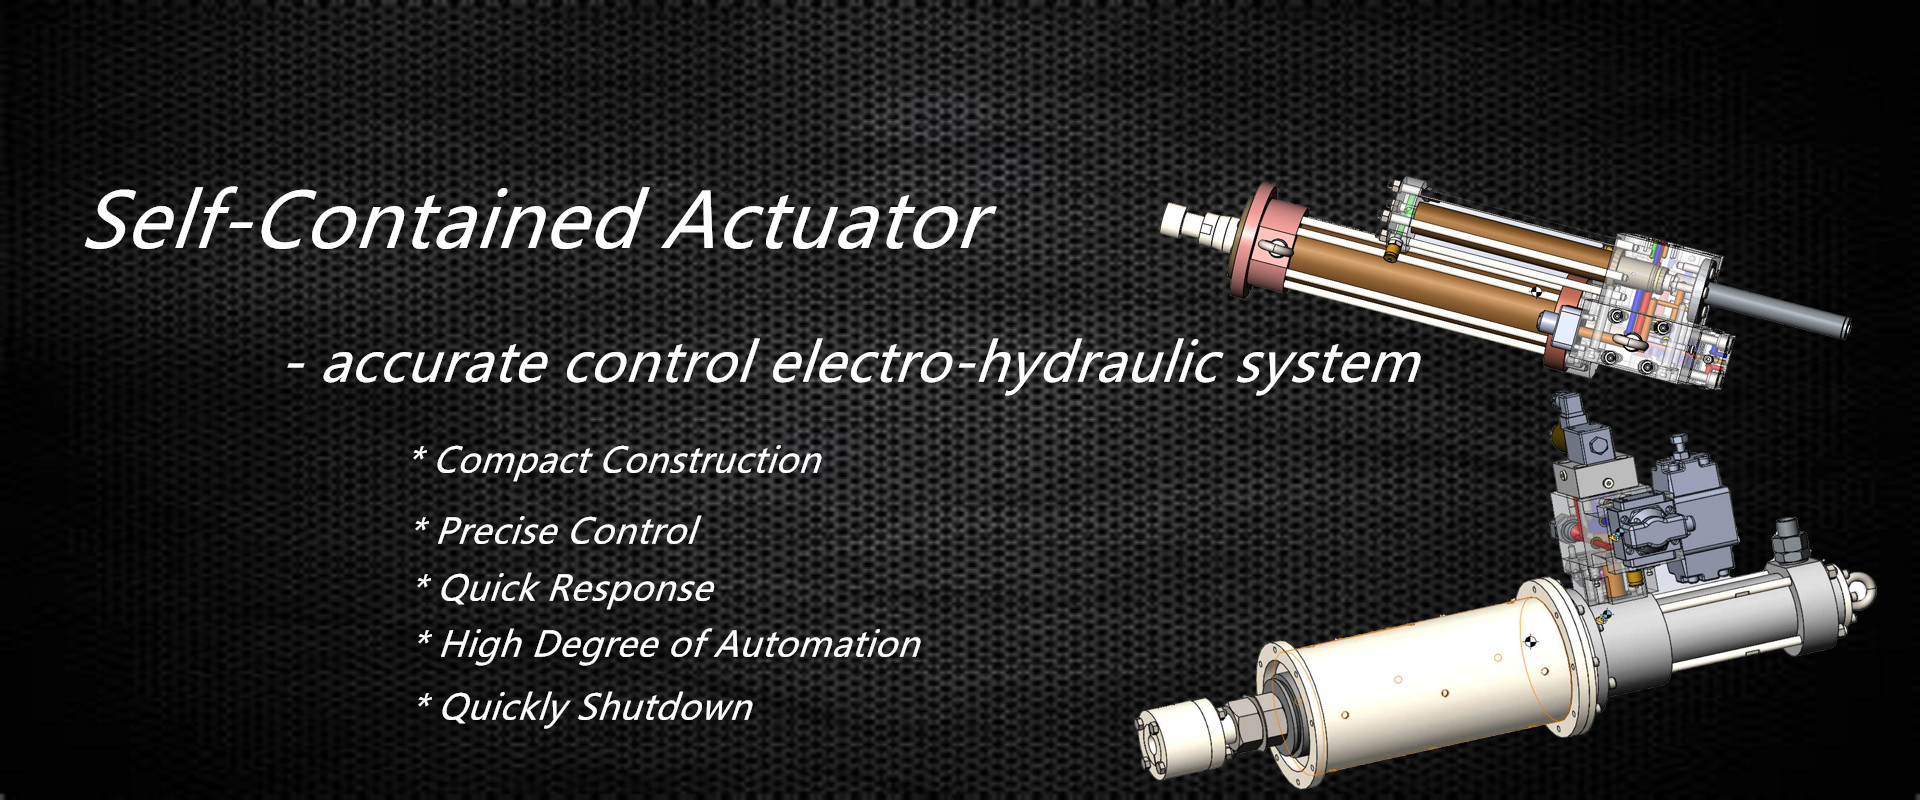 Self-Contained Actuator